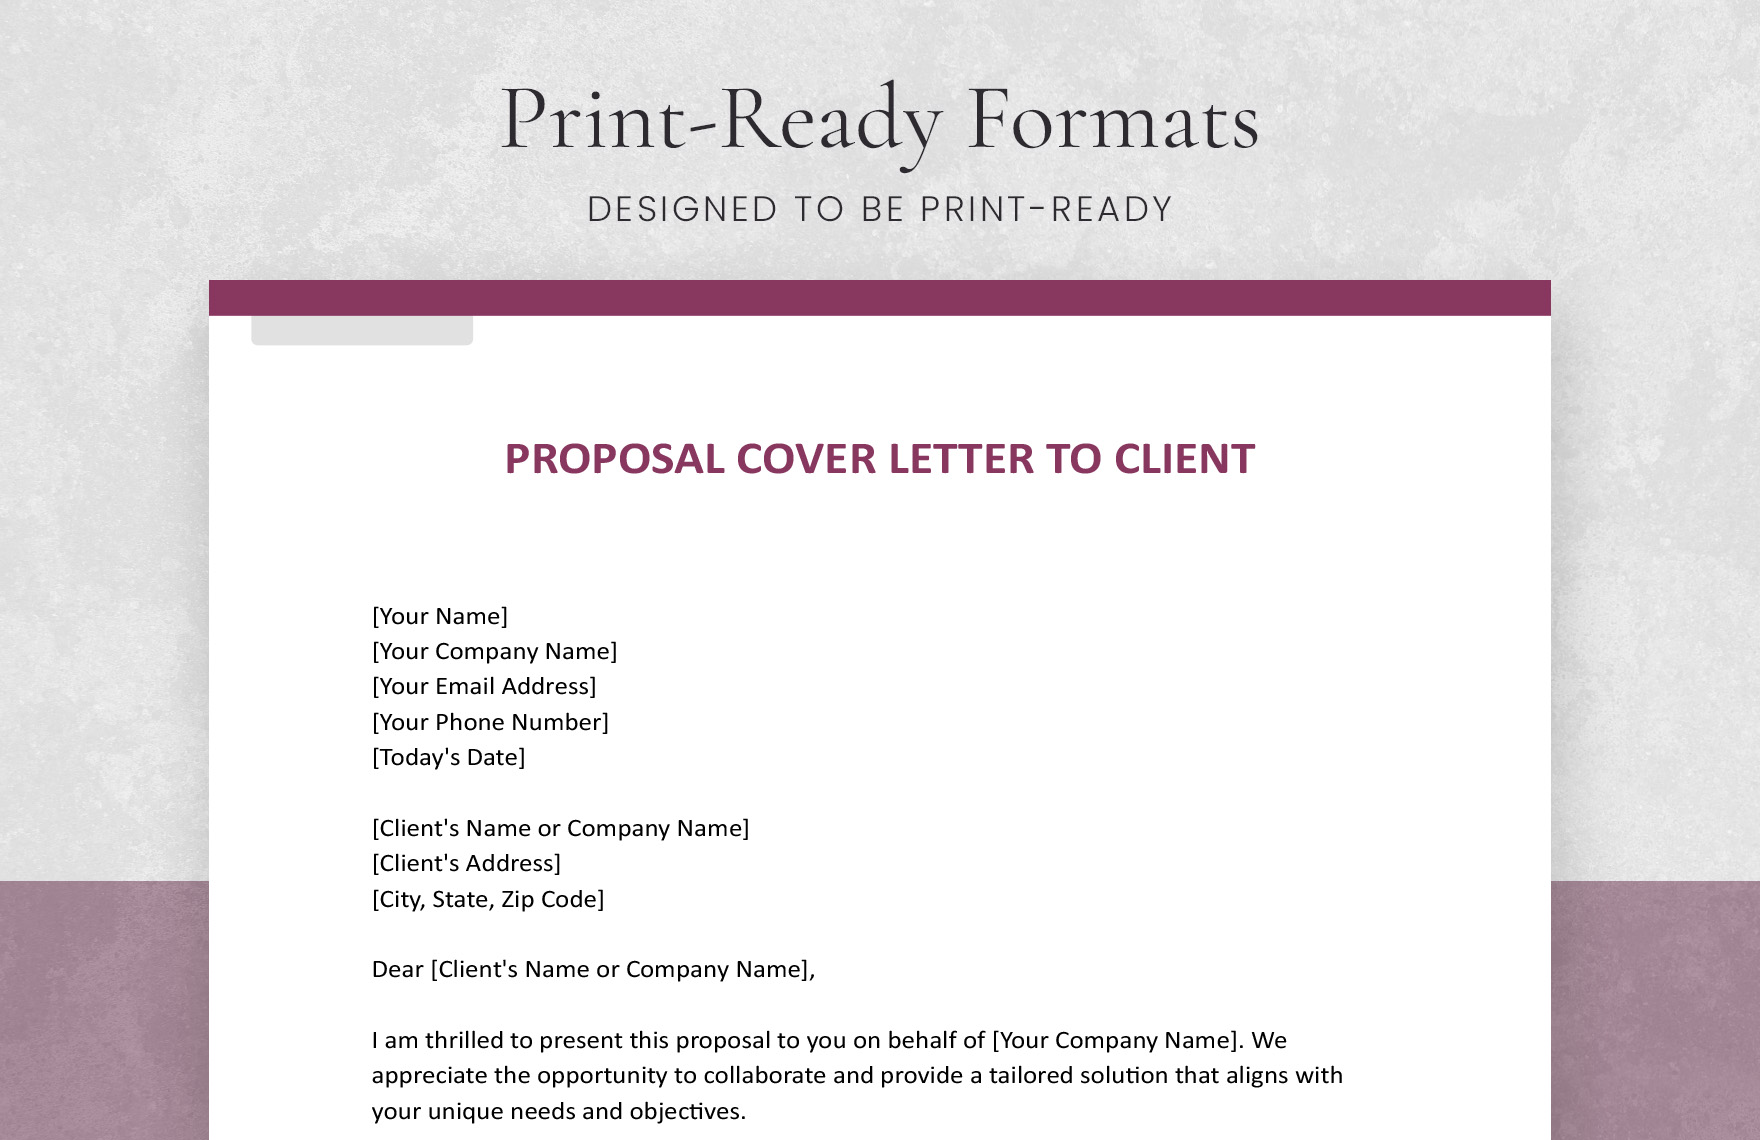 Proposal Cover Letter To Client